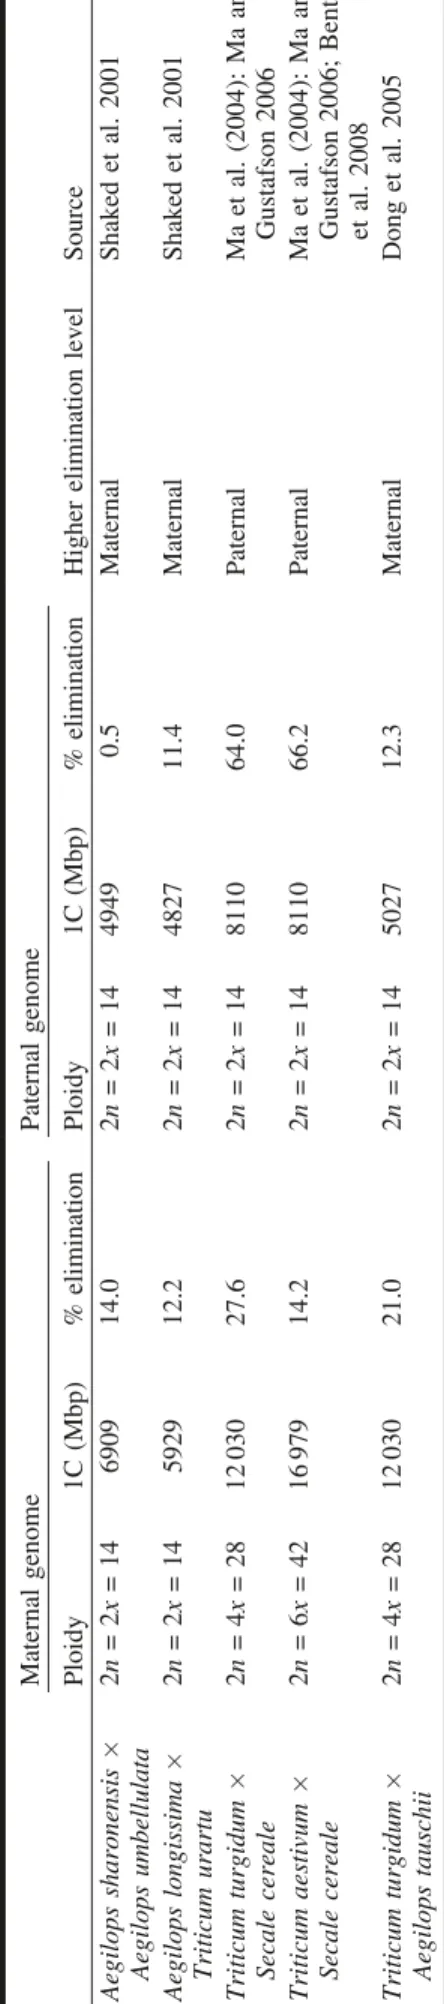 Table 7. DNA 1C-value and cell cycle time (CCT) in triticale and wheat and rye parental species.